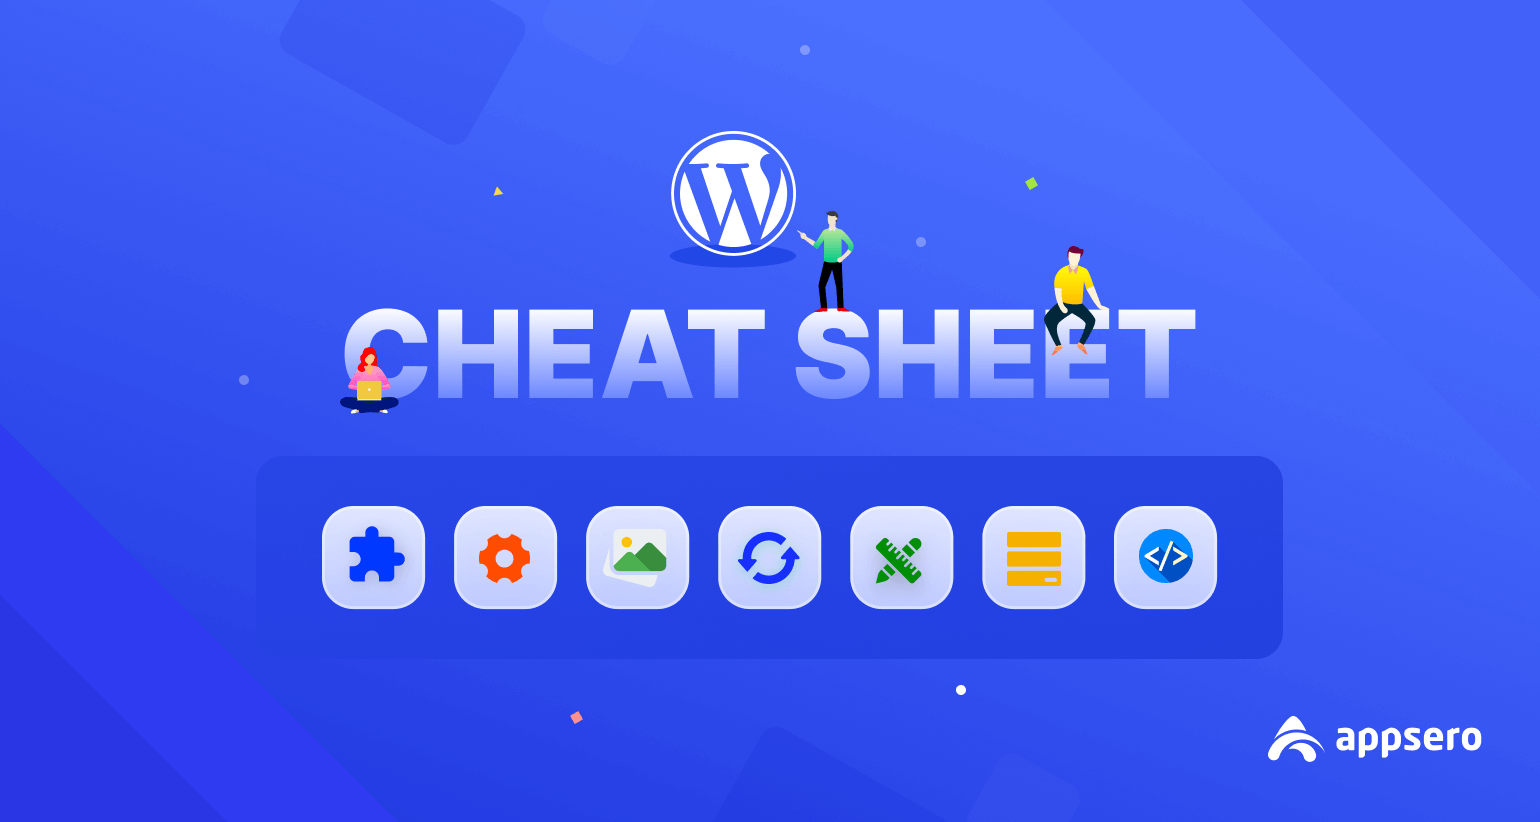 WordPress Cheat Sheet for Developers (With Downloadable PDF)